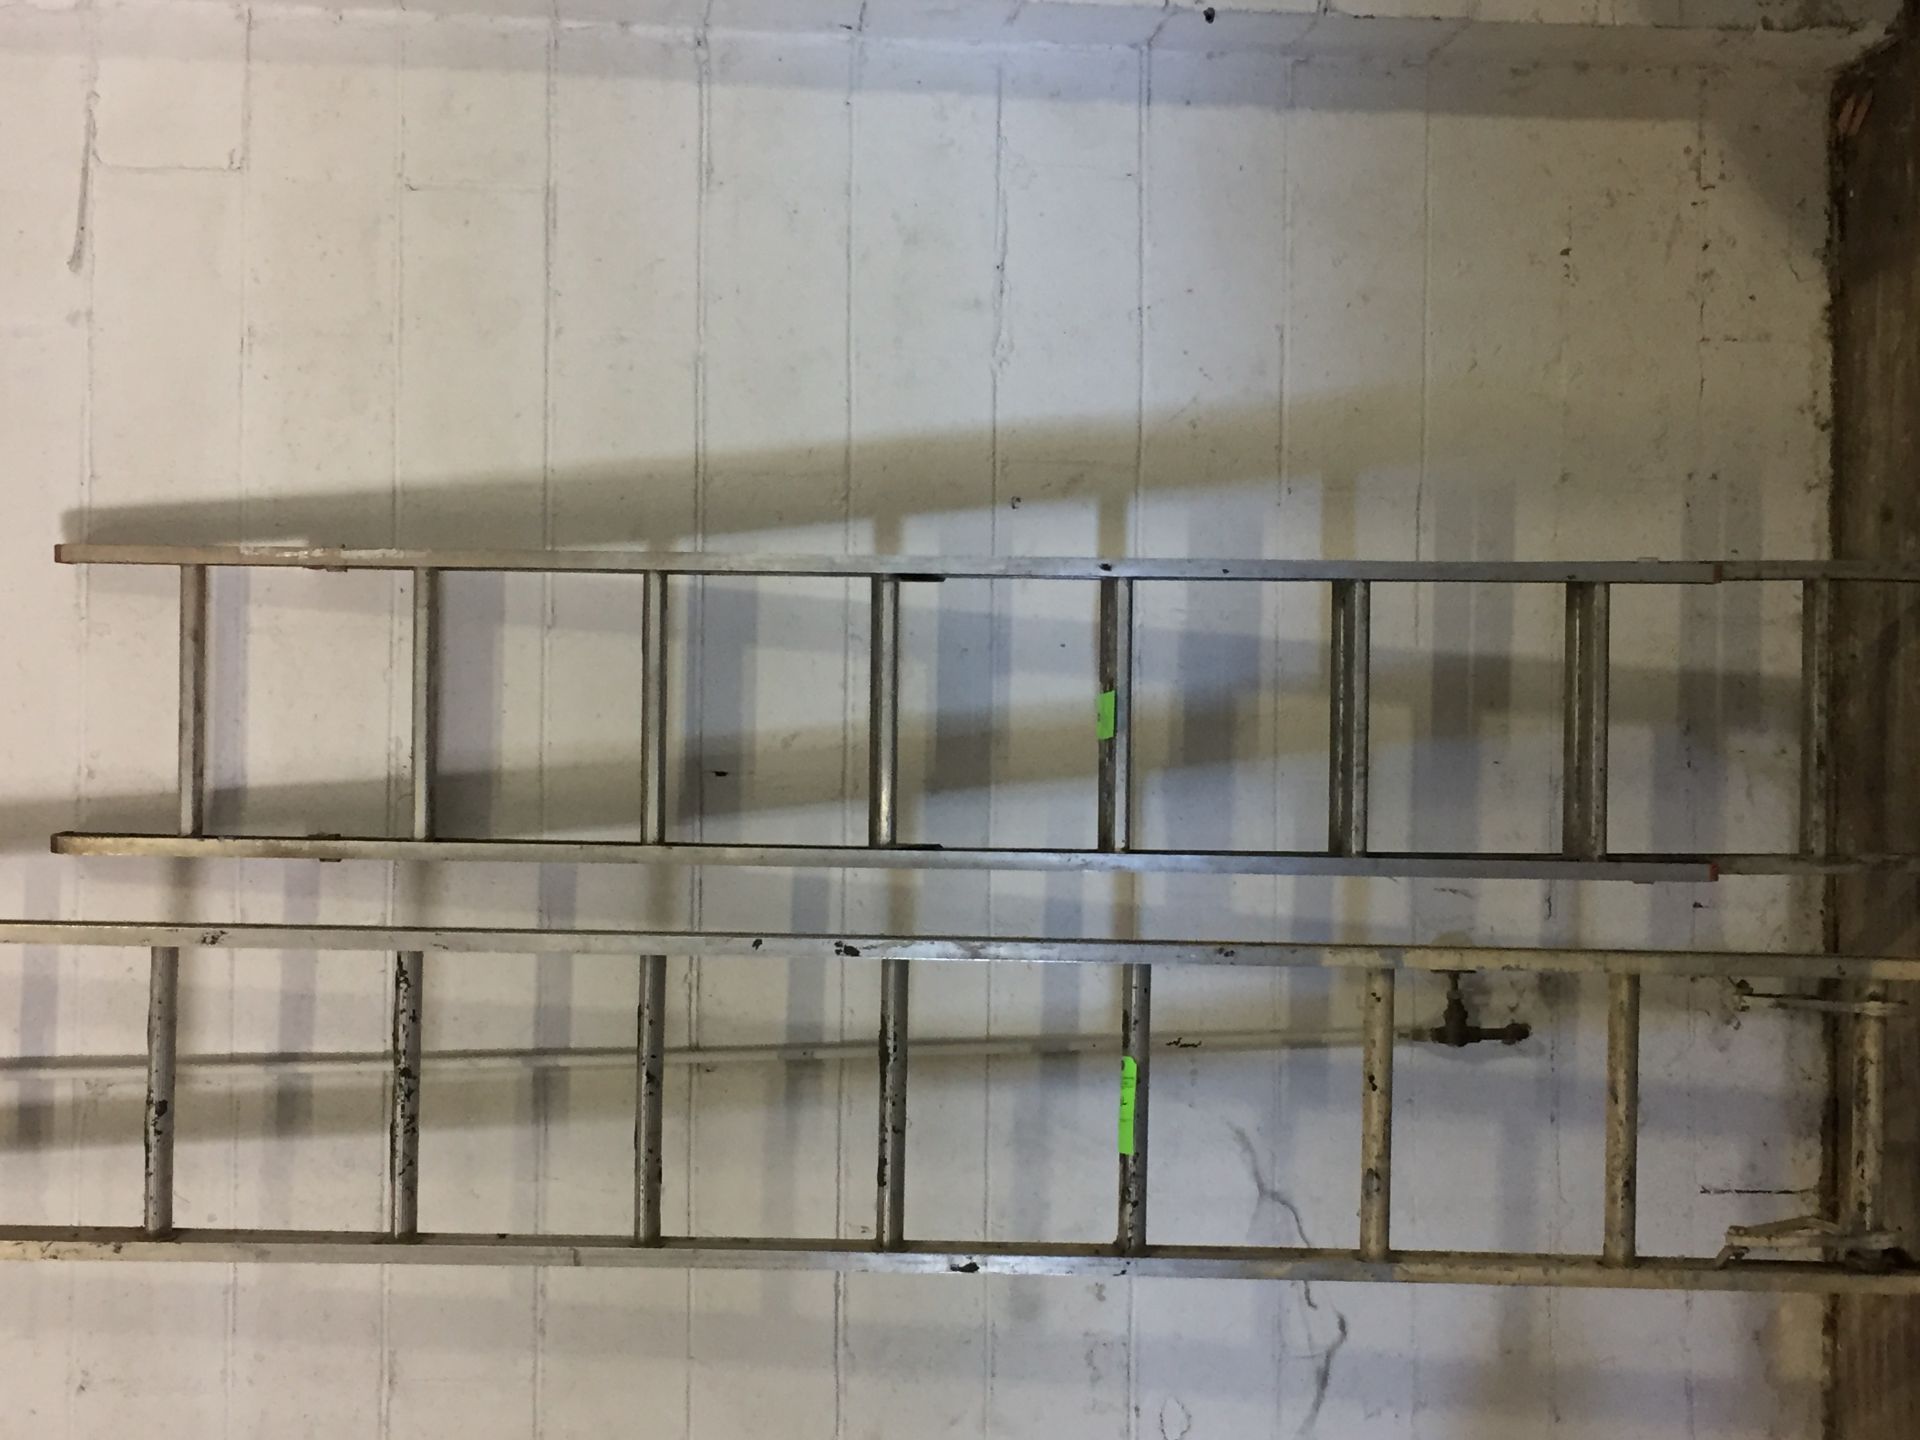 EXTENSION LADDER - Image 2 of 2